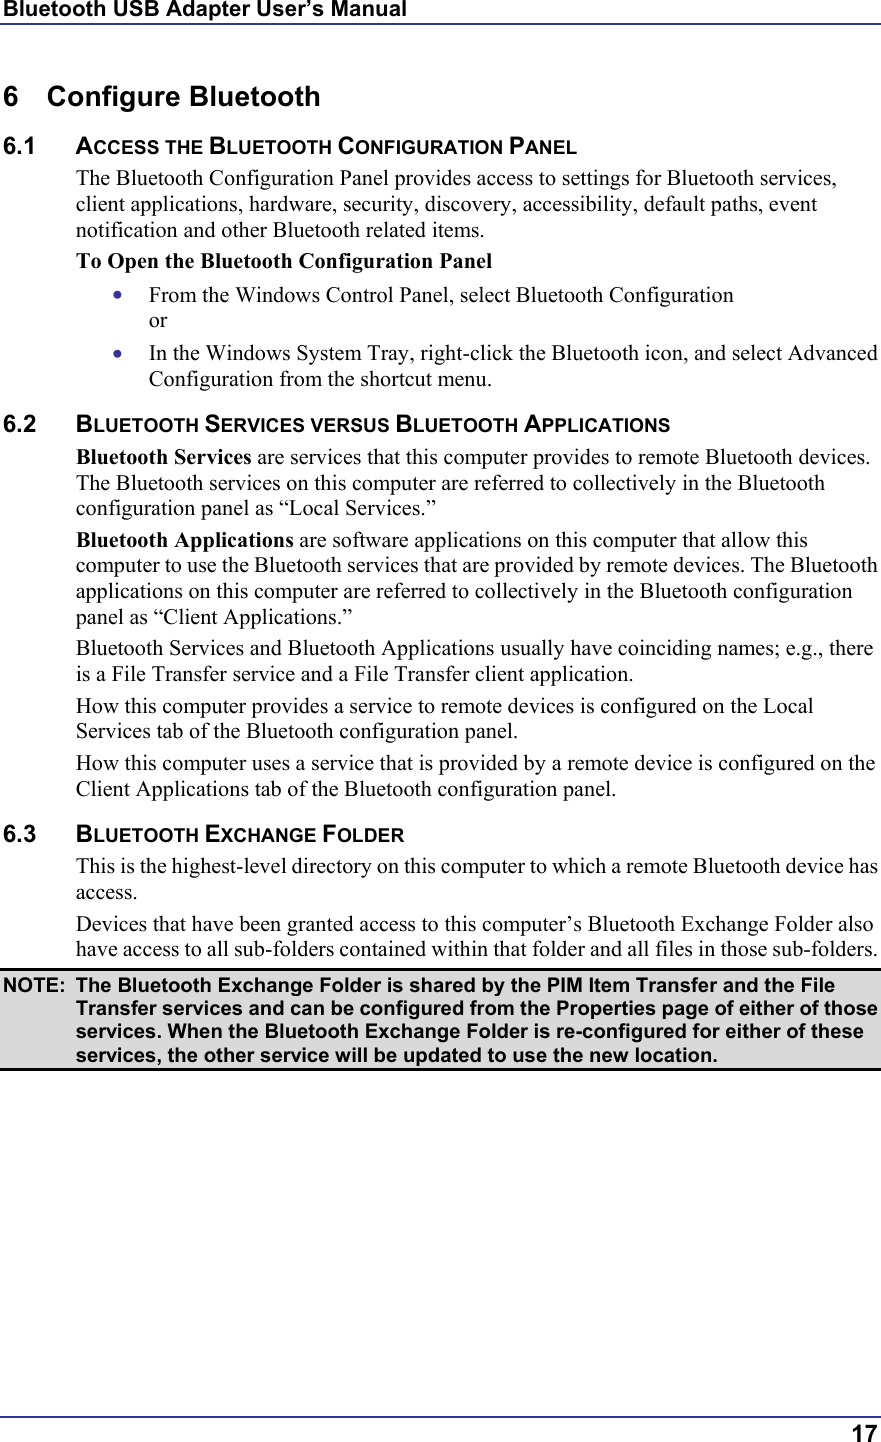 Bluetooth USB Adapter User’s Manual  17 6 Configure Bluetooth 6.1 ACCESS THE BLUETOOTH CONFIGURATION PANEL The Bluetooth Configuration Panel provides access to settings for Bluetooth services, client applications, hardware, security, discovery, accessibility, default paths, event notification and other Bluetooth related items. To Open the Bluetooth Configuration Panel •  From the Windows Control Panel, select Bluetooth Configuration or •  In the Windows System Tray, right-click the Bluetooth icon, and select Advanced Configuration from the shortcut menu. 6.2 BLUETOOTH SERVICES VERSUS BLUETOOTH APPLICATIONS Bluetooth Services are services that this computer provides to remote Bluetooth devices. The Bluetooth services on this computer are referred to collectively in the Bluetooth configuration panel as “Local Services.” Bluetooth Applications are software applications on this computer that allow this computer to use the Bluetooth services that are provided by remote devices. The Bluetooth applications on this computer are referred to collectively in the Bluetooth configuration panel as “Client Applications.” Bluetooth Services and Bluetooth Applications usually have coinciding names; e.g., there is a File Transfer service and a File Transfer client application. How this computer provides a service to remote devices is configured on the Local Services tab of the Bluetooth configuration panel. How this computer uses a service that is provided by a remote device is configured on the Client Applications tab of the Bluetooth configuration panel. 6.3 BLUETOOTH EXCHANGE FOLDER This is the highest-level directory on this computer to which a remote Bluetooth device has access. Devices that have been granted access to this computer’s Bluetooth Exchange Folder also have access to all sub-folders contained within that folder and all files in those sub-folders. NOTE:  The Bluetooth Exchange Folder is shared by the PIM Item Transfer and the File Transfer services and can be configured from the Properties page of either of those services. When the Bluetooth Exchange Folder is re-configured for either of these services, the other service will be updated to use the new location. 